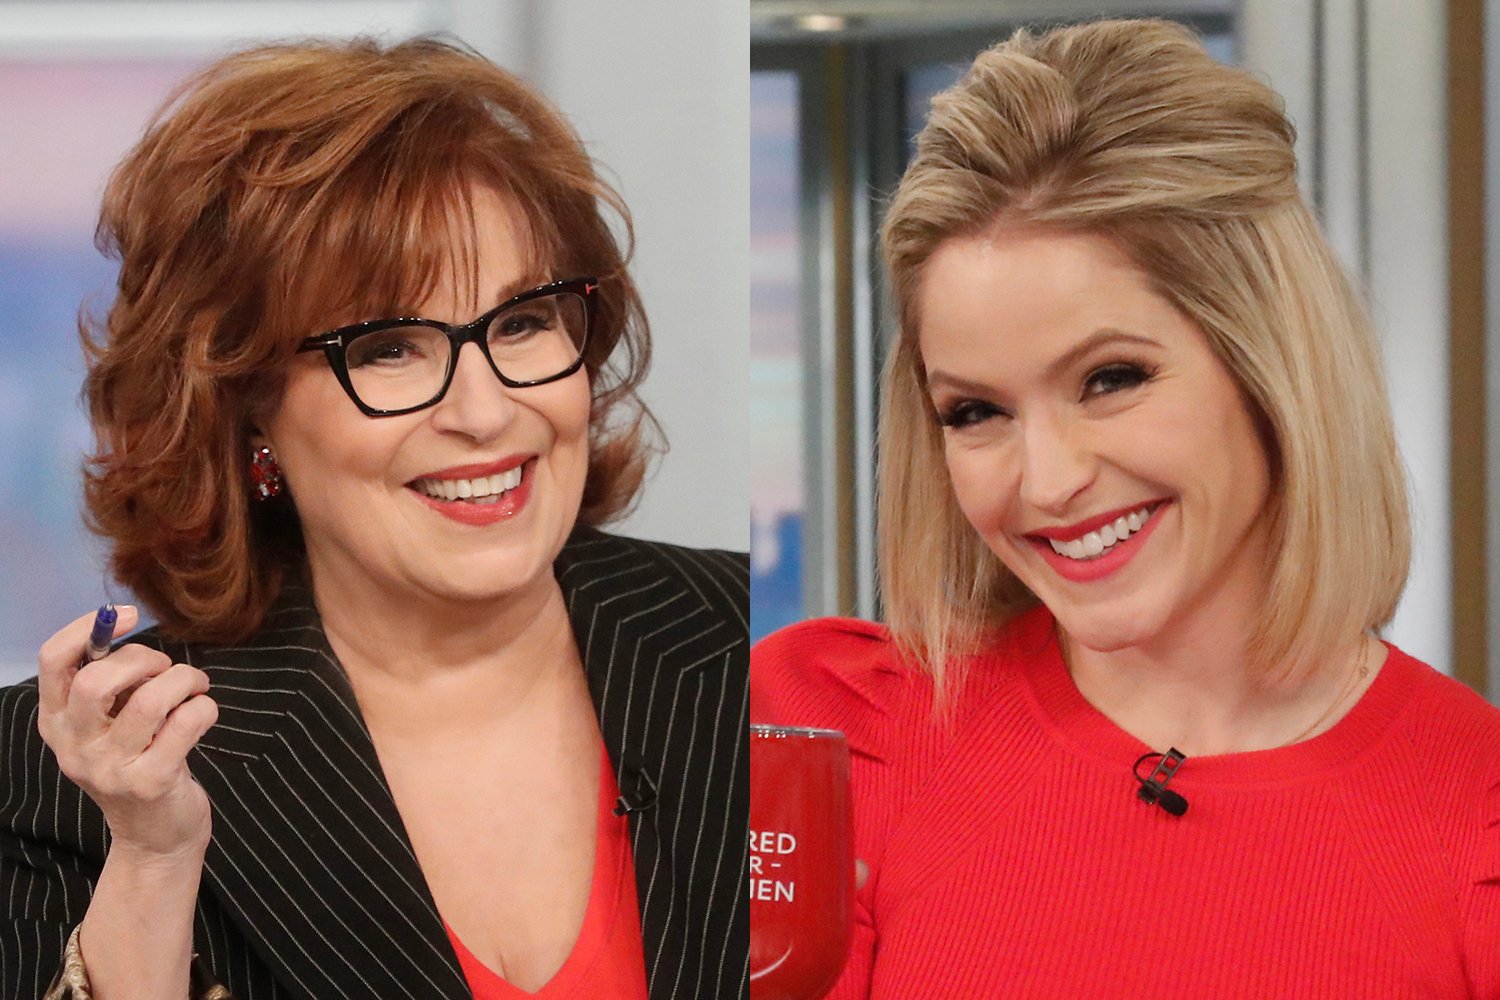 ‘The View’ Co-Host Joy Behar Snaps at Sara Haines and Makes Things Awkward: ‘Don’t Touch Me’